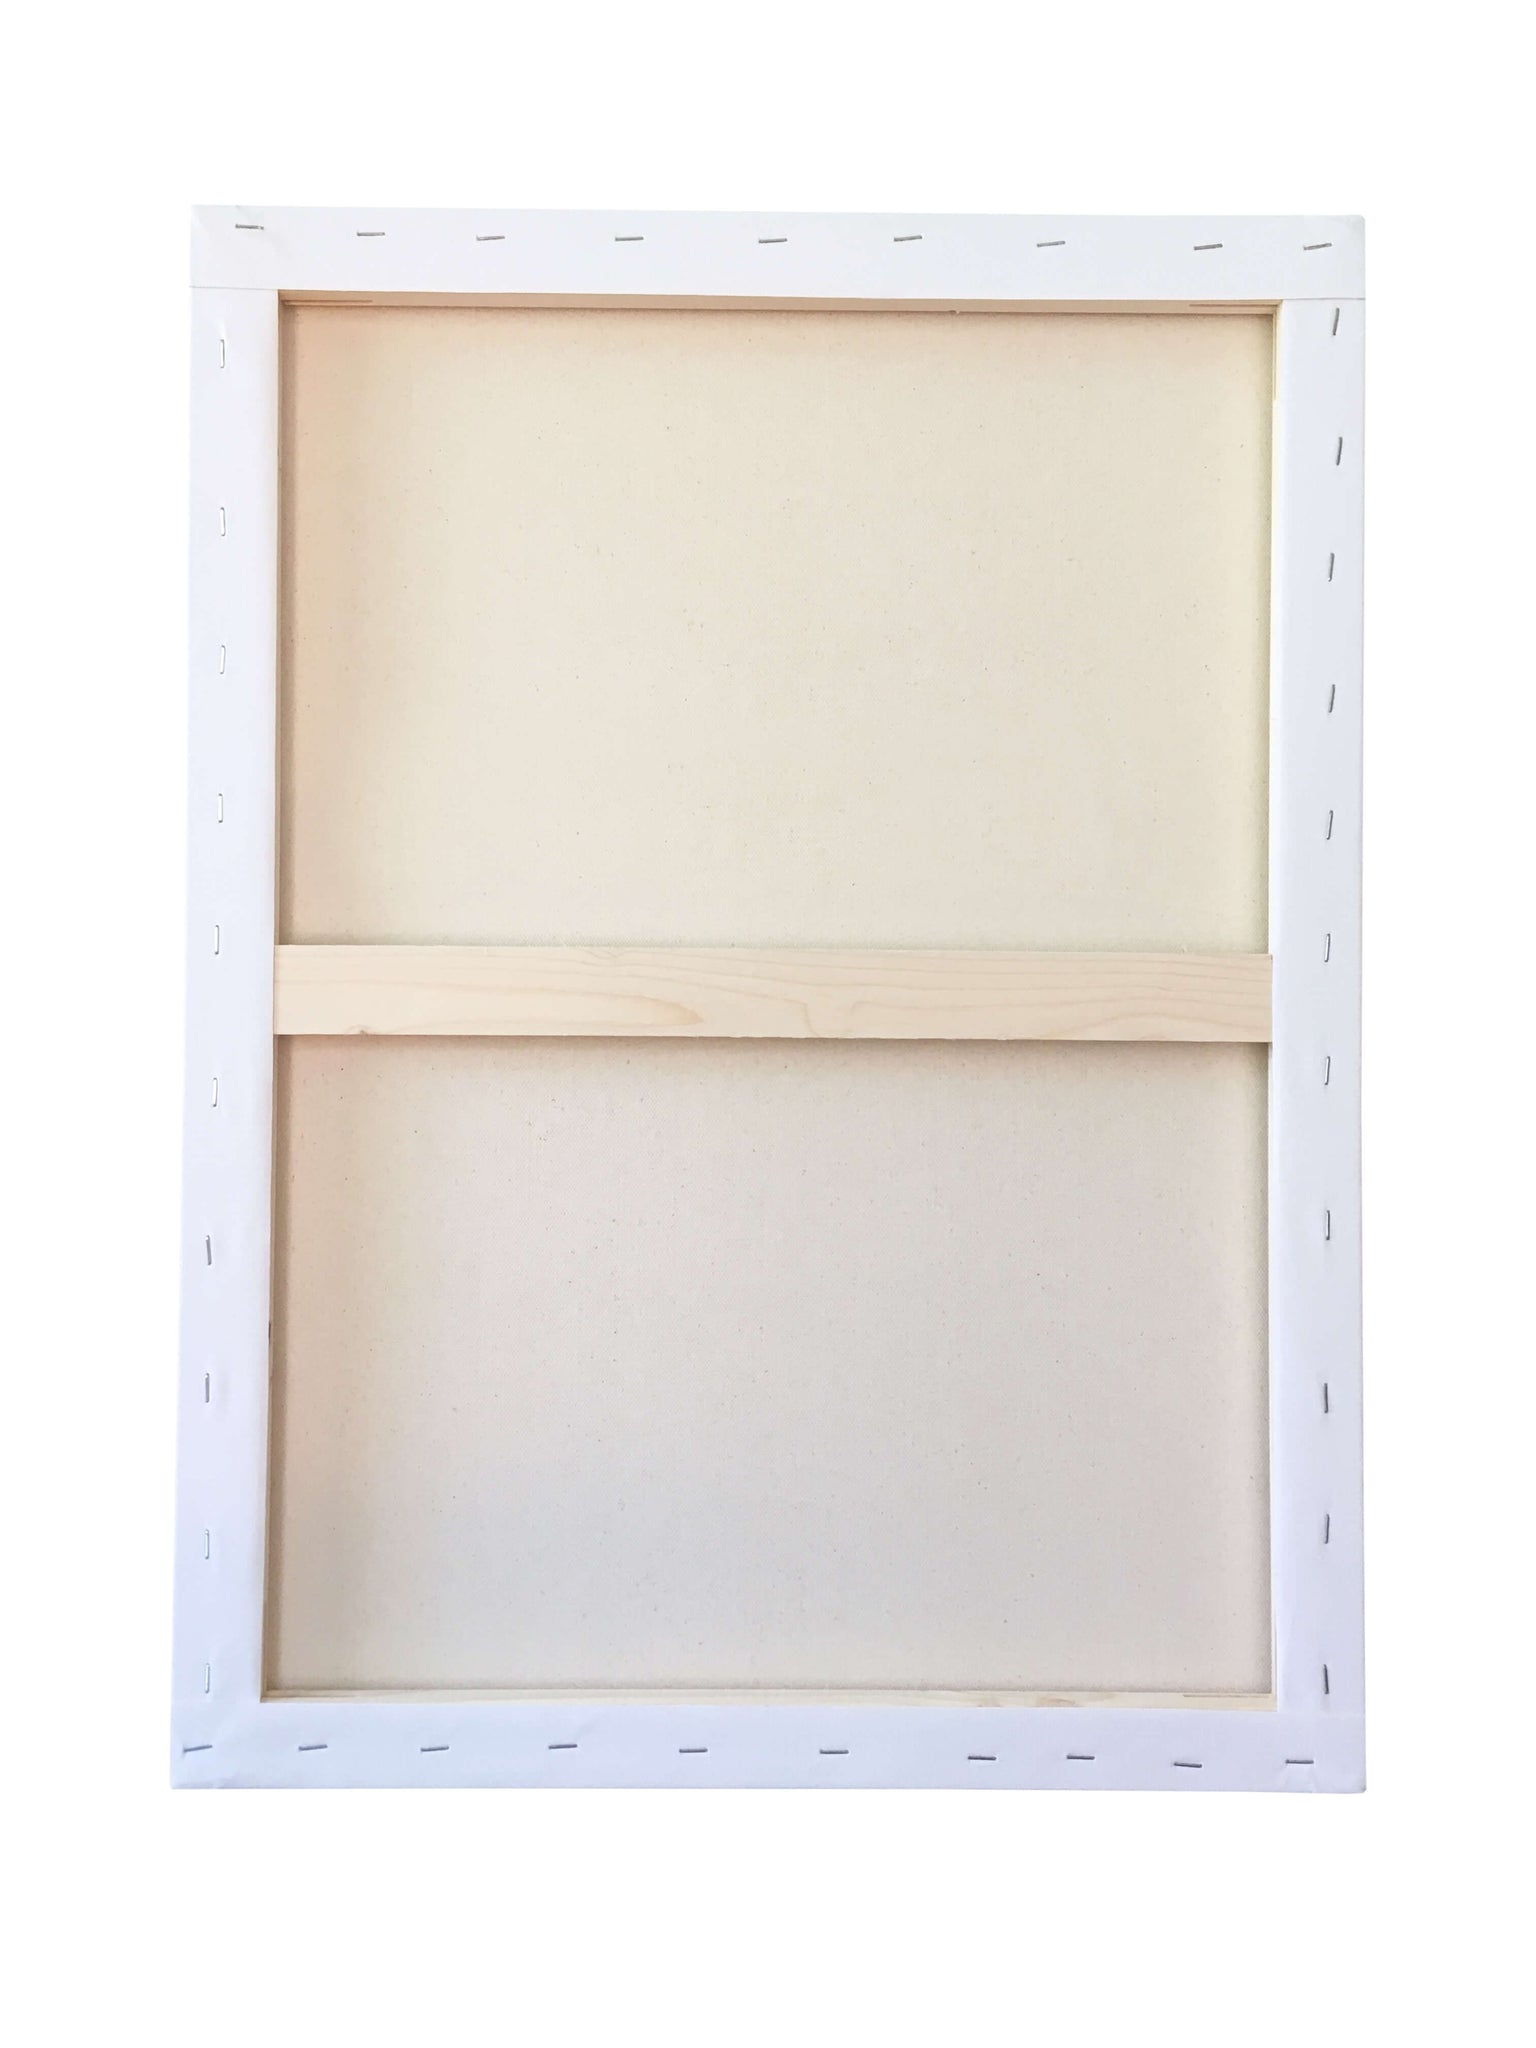 Pack of 4 Stretched Canvas for Painting 9x12 inch,24x30cm Primed